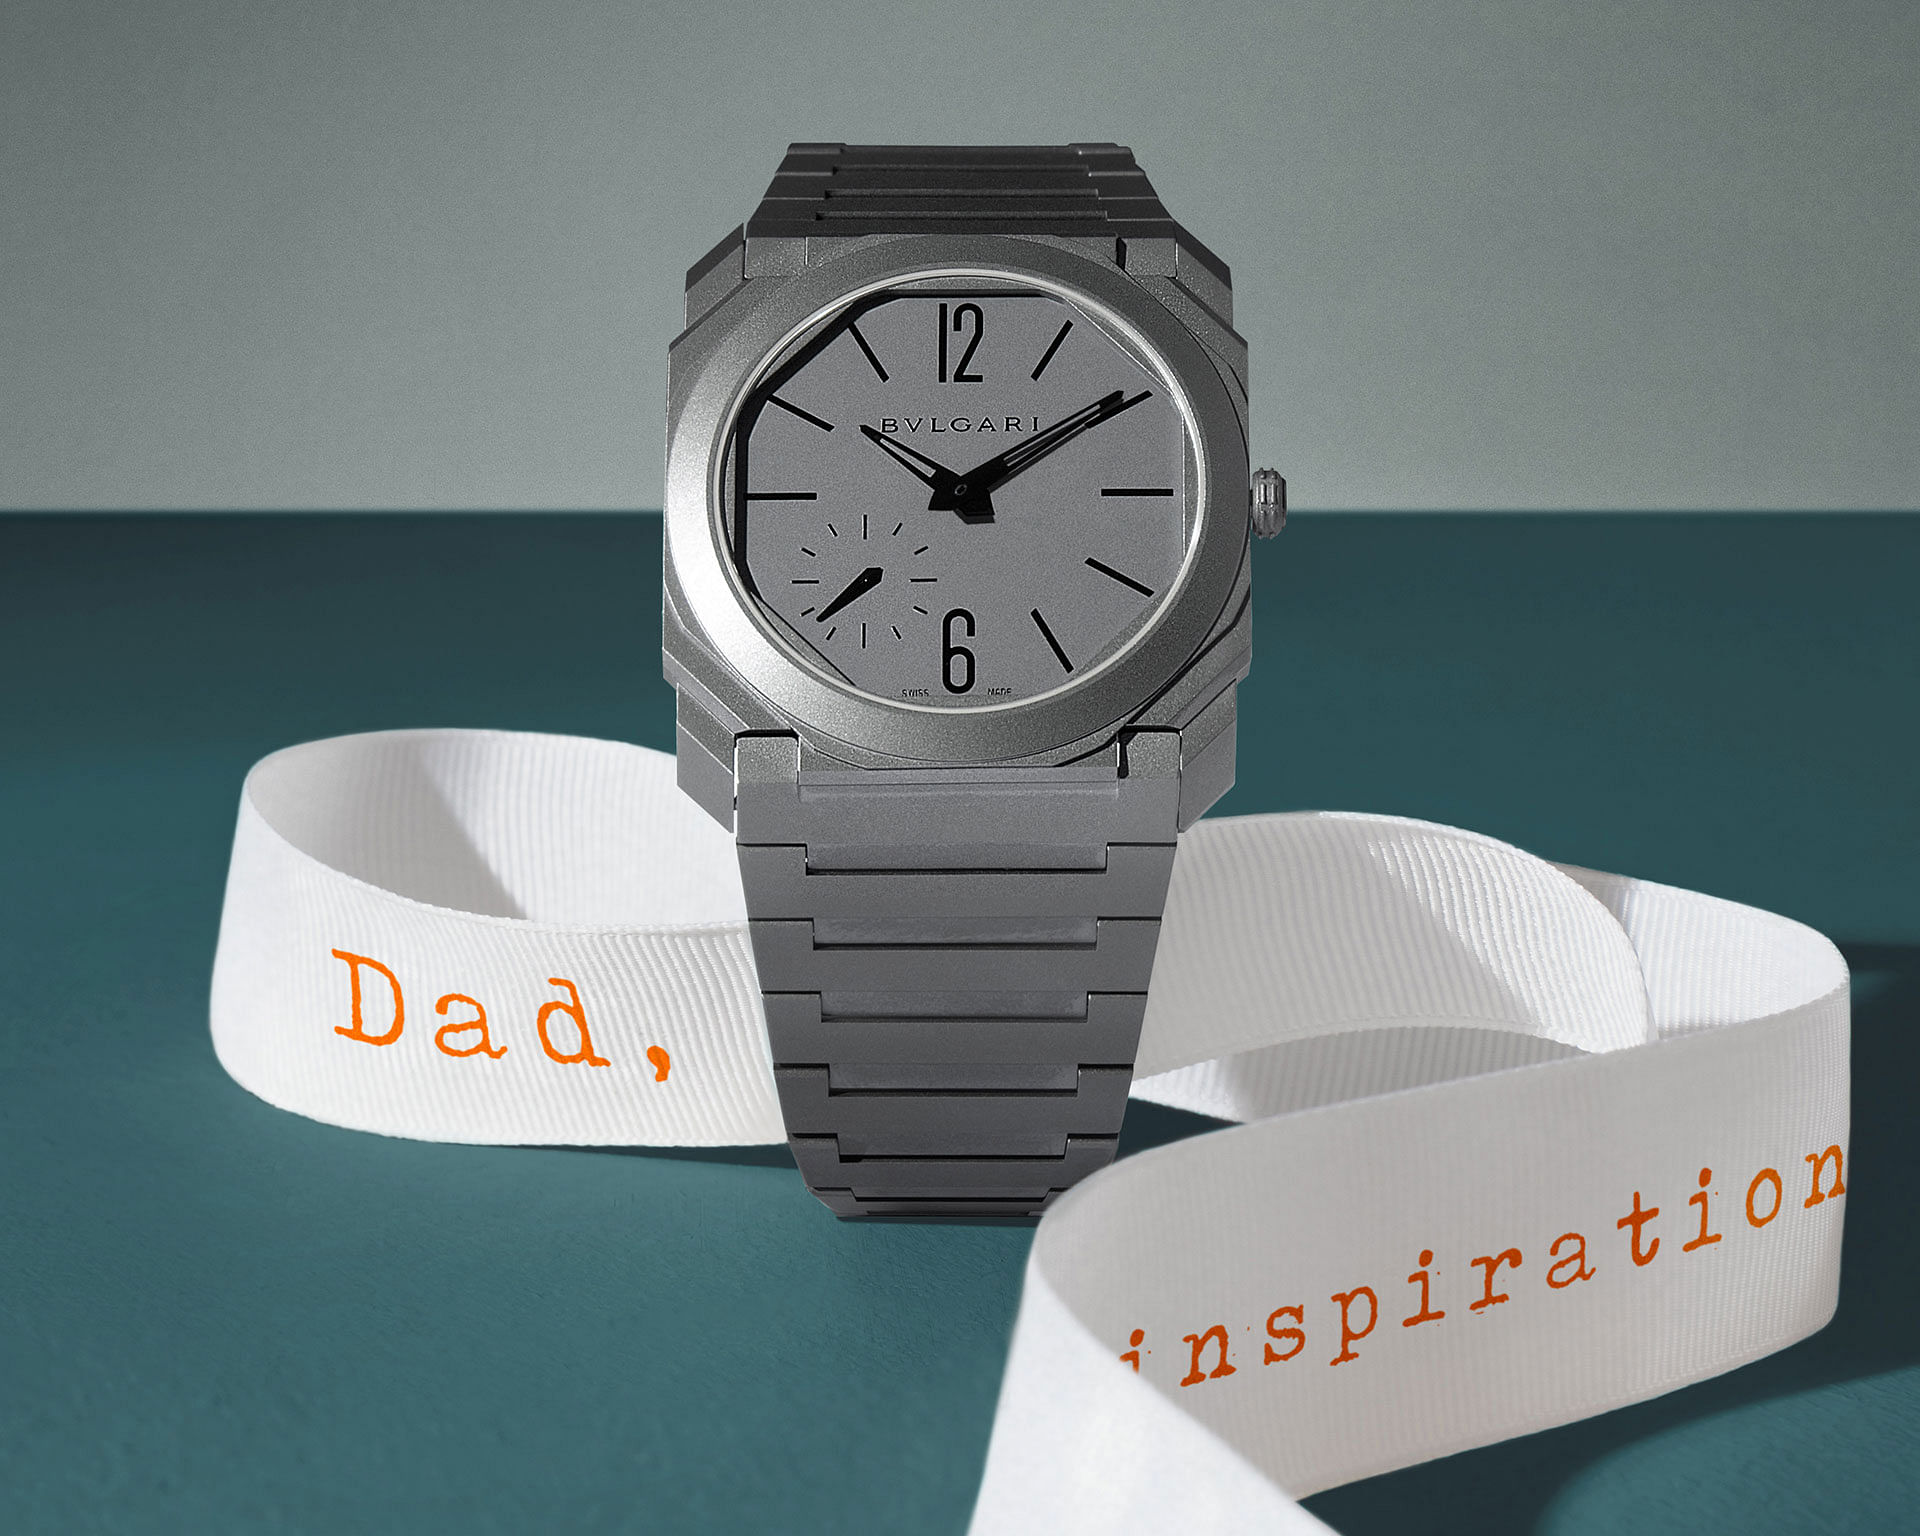 Watches, Watches & Jewellery, Father's Day, Gift, Men's Watch, Cartier, BVLGARI, Richard Mille, Omega, Piaget, Jaeger-LeCoultre, Vacheron Constantin, Audemars Piguet, Tiffany & Co.